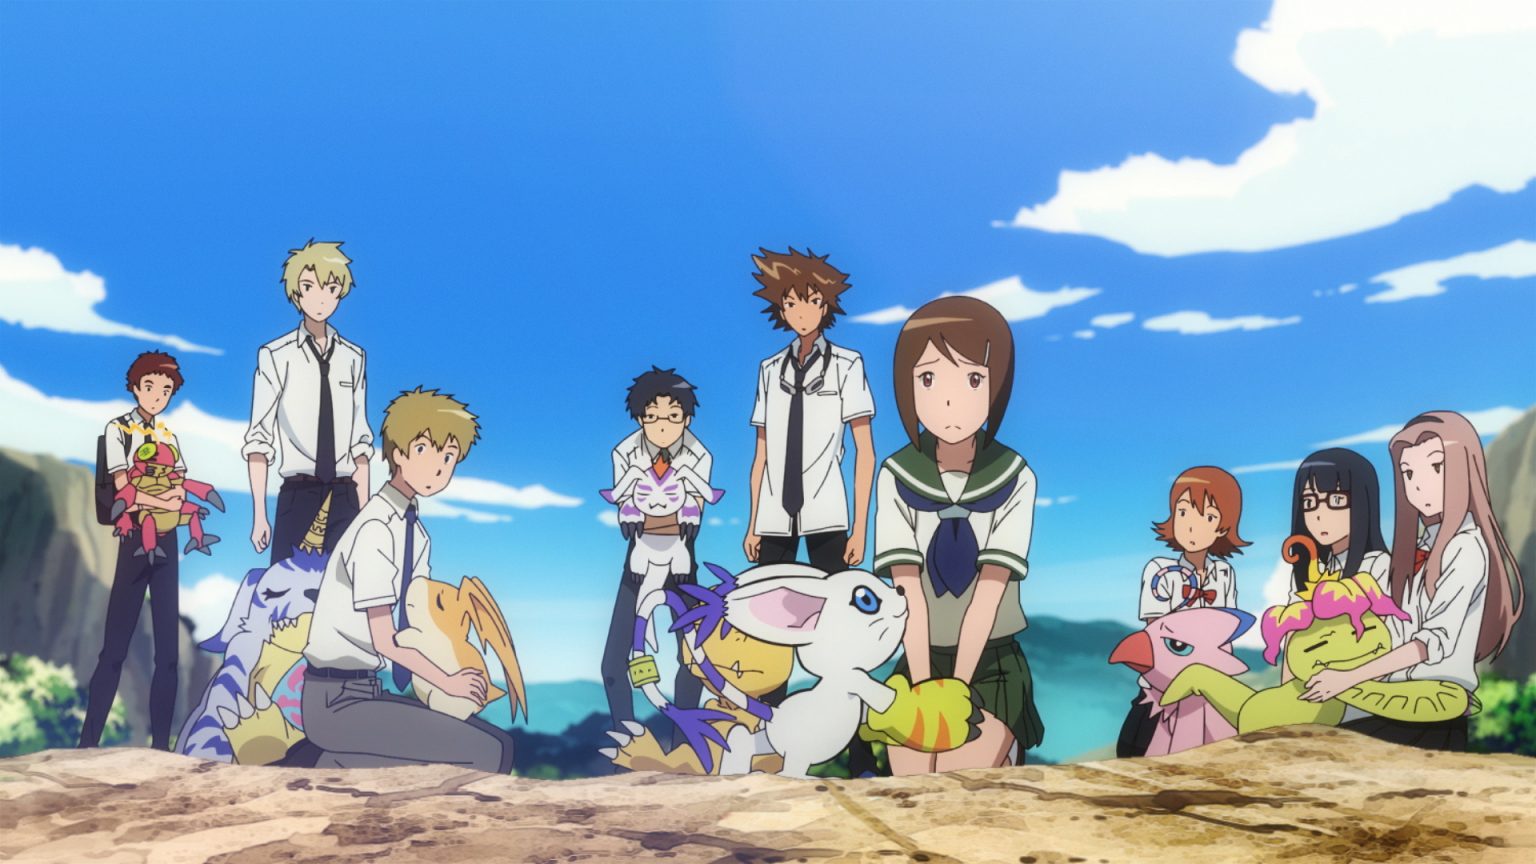 Digimon Adventure Tri: Coexistence - Graphics and Action that Draw You In! 